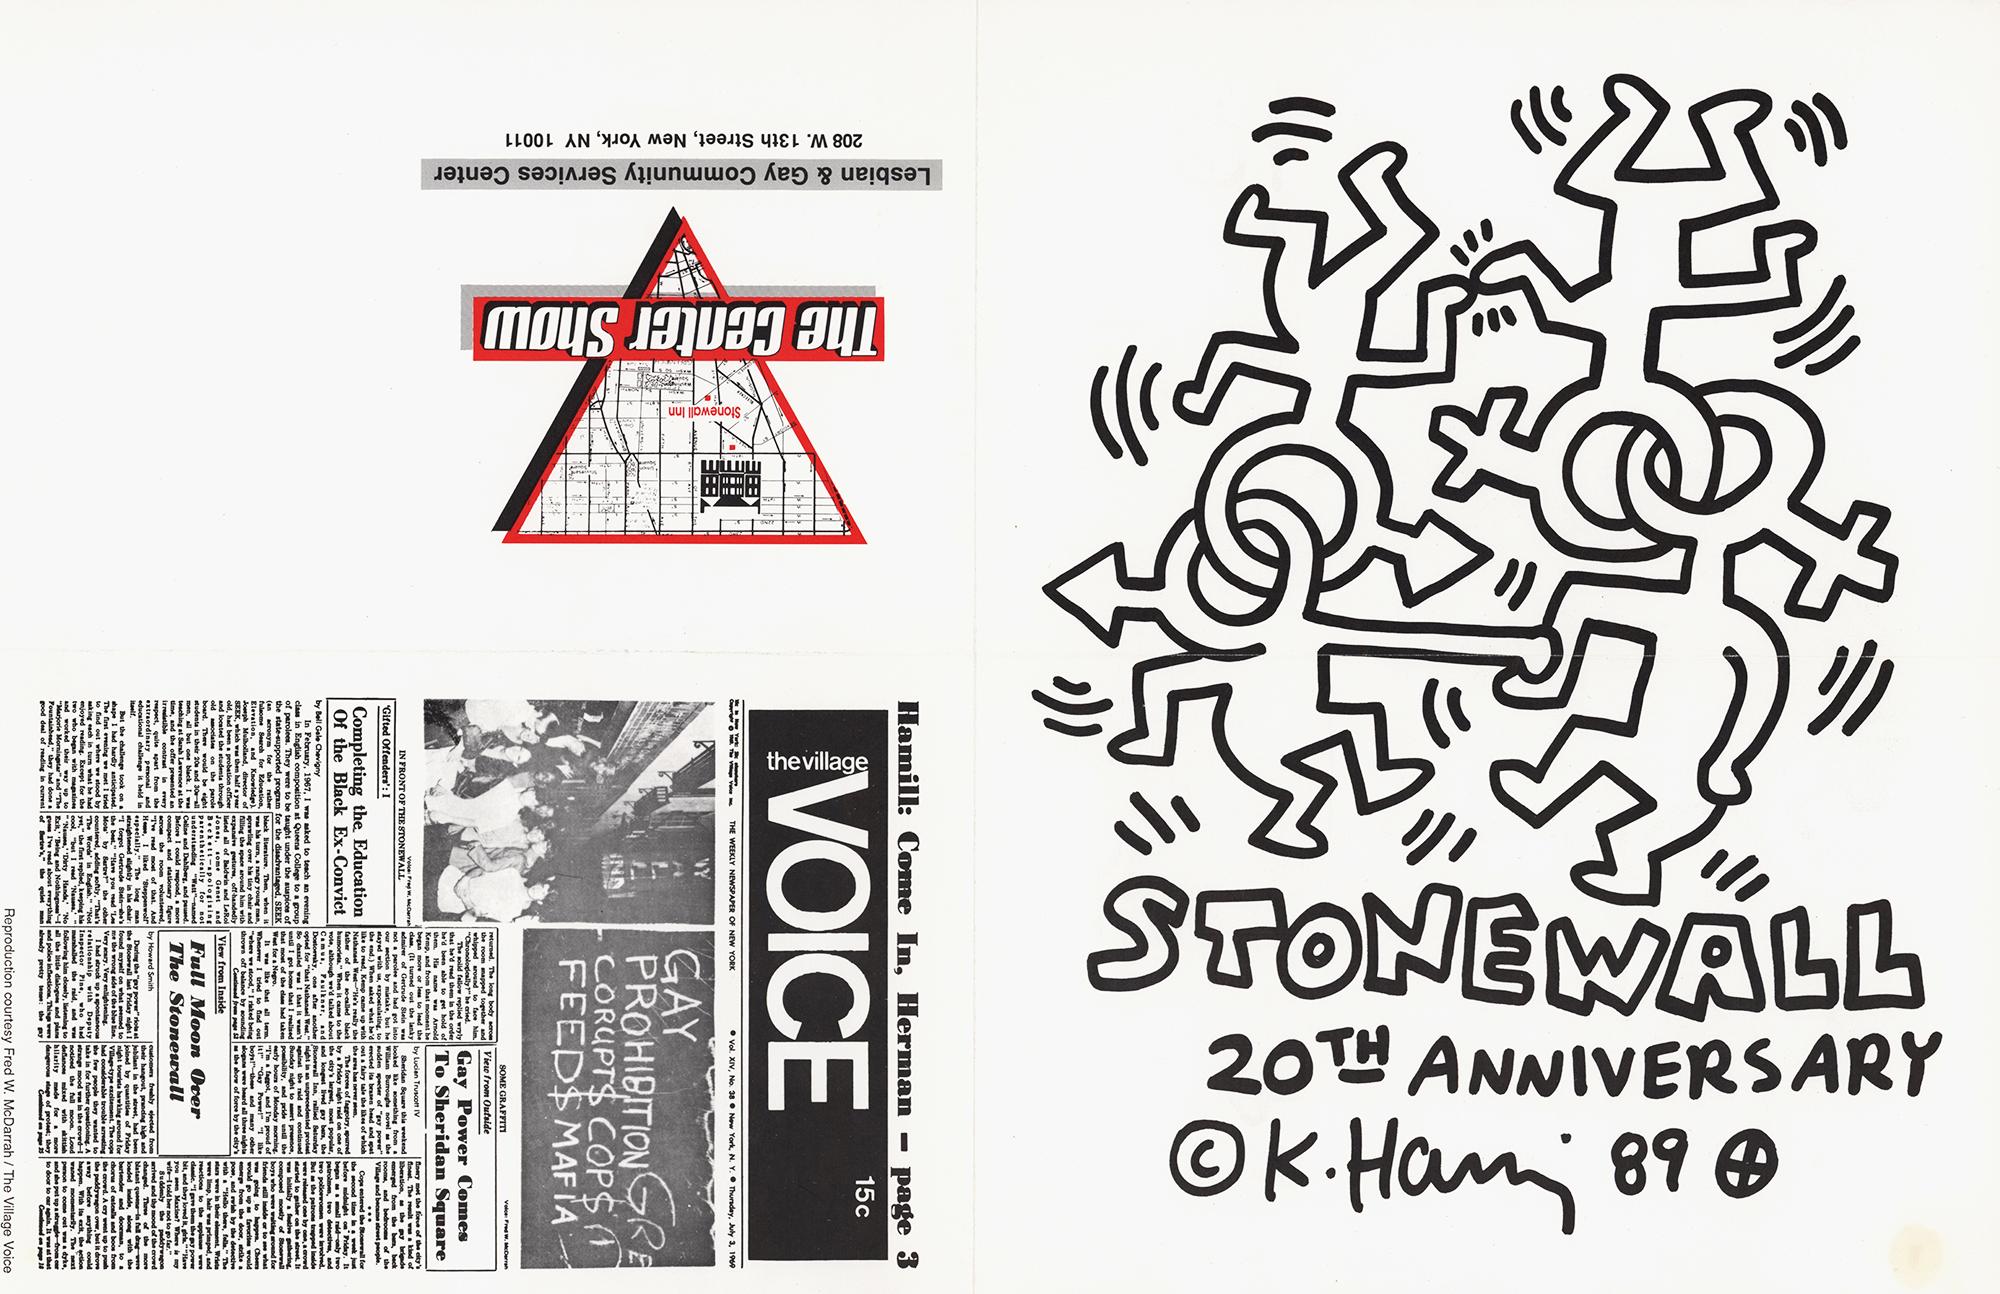 Keith Haring Stonewall 20th Anniversary/The Center Show, New York, NY 1989:

RARE, historic 1980s fold-out poster illustrated by Keith Haring to commemorate the 20th anniversary of the 1969 Stonewall Riots at “The Center” (aka, Lesbian, Gay,